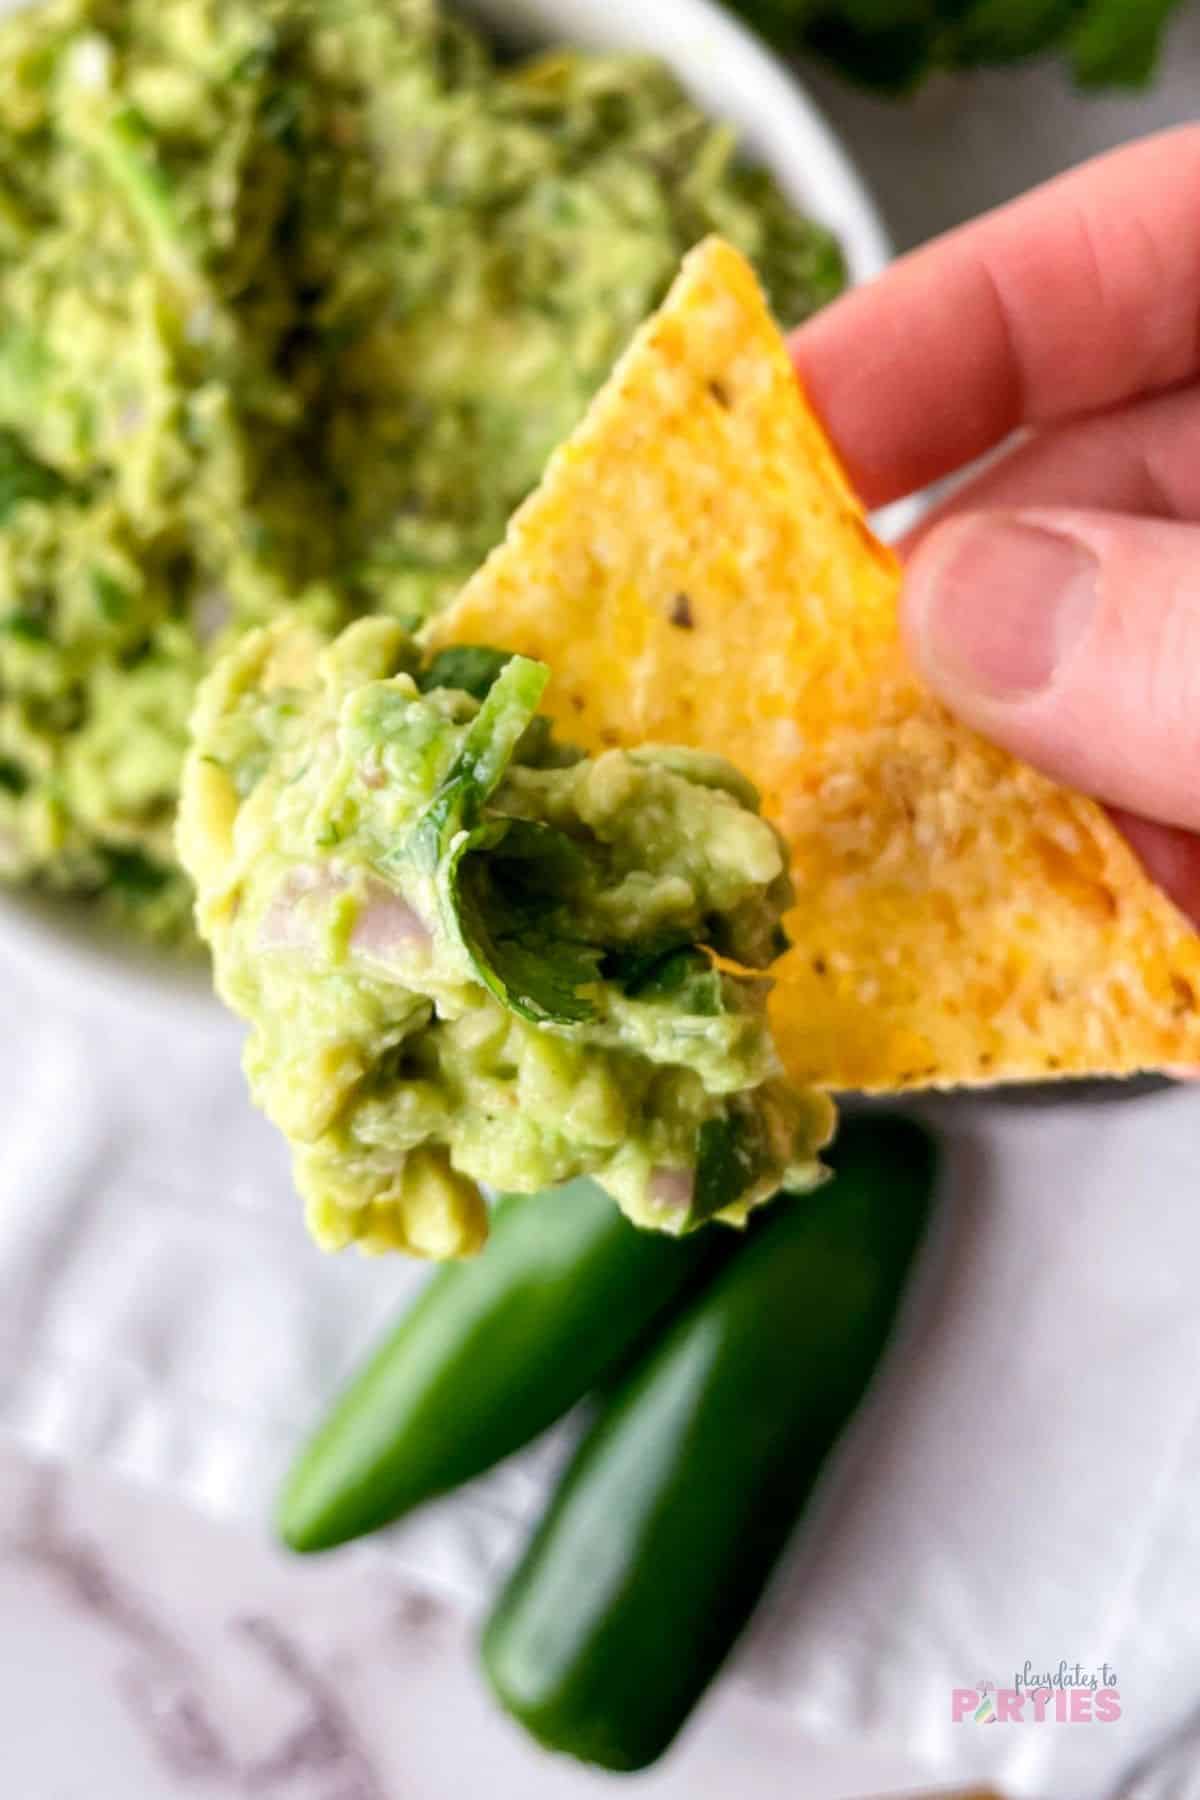 A woman's hand holding a chip with guacamole on it.